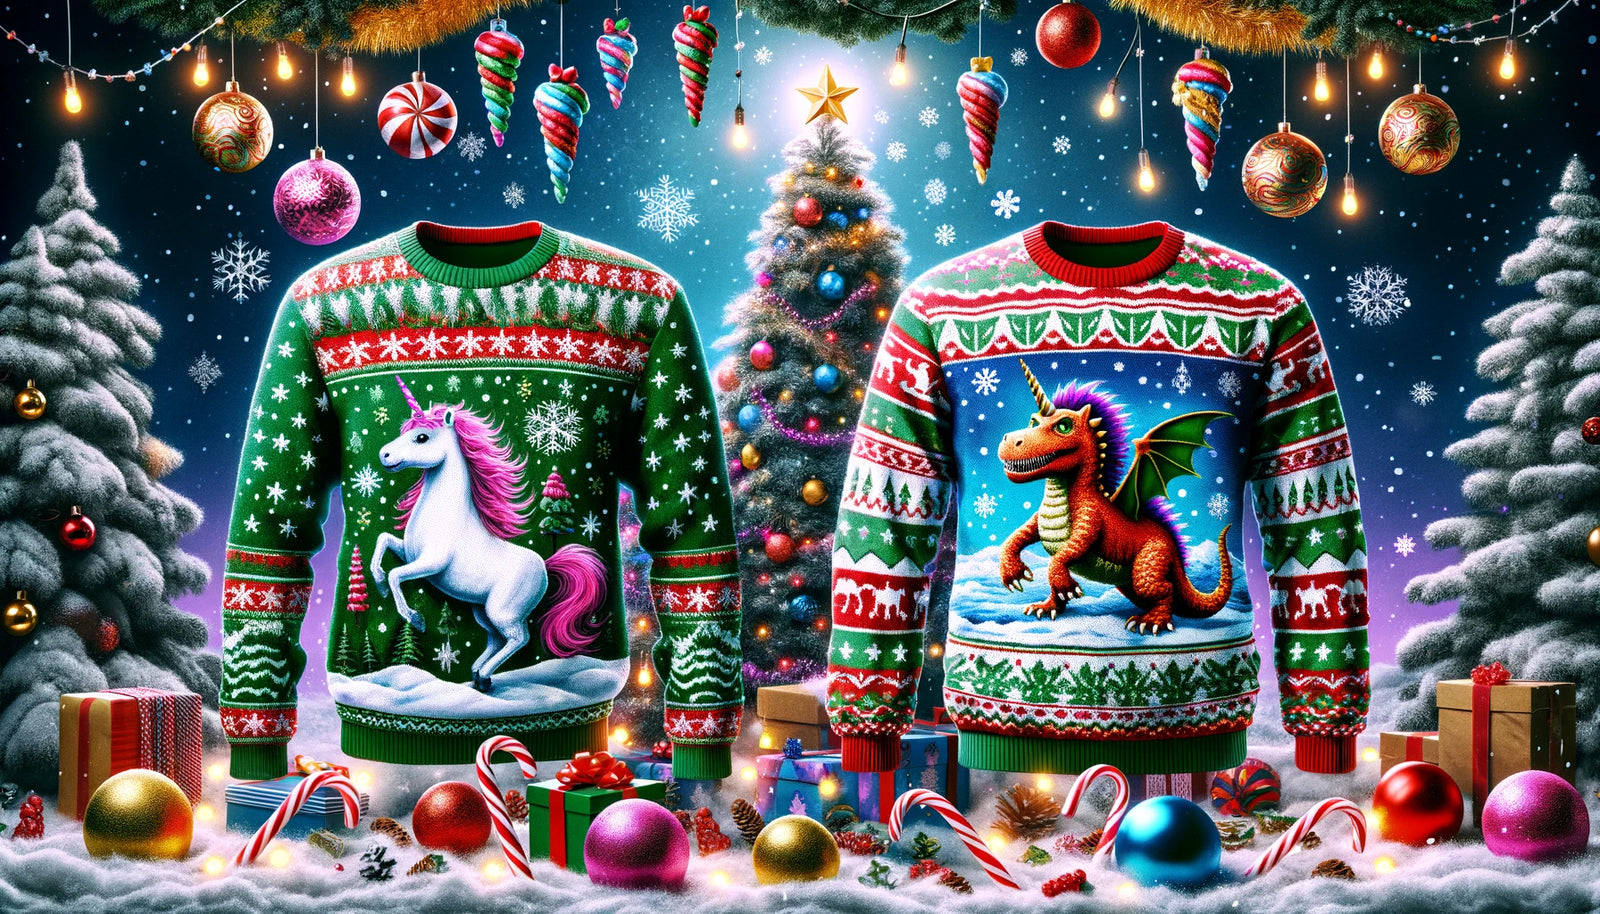 What is a Tacky Christmas Sweater?